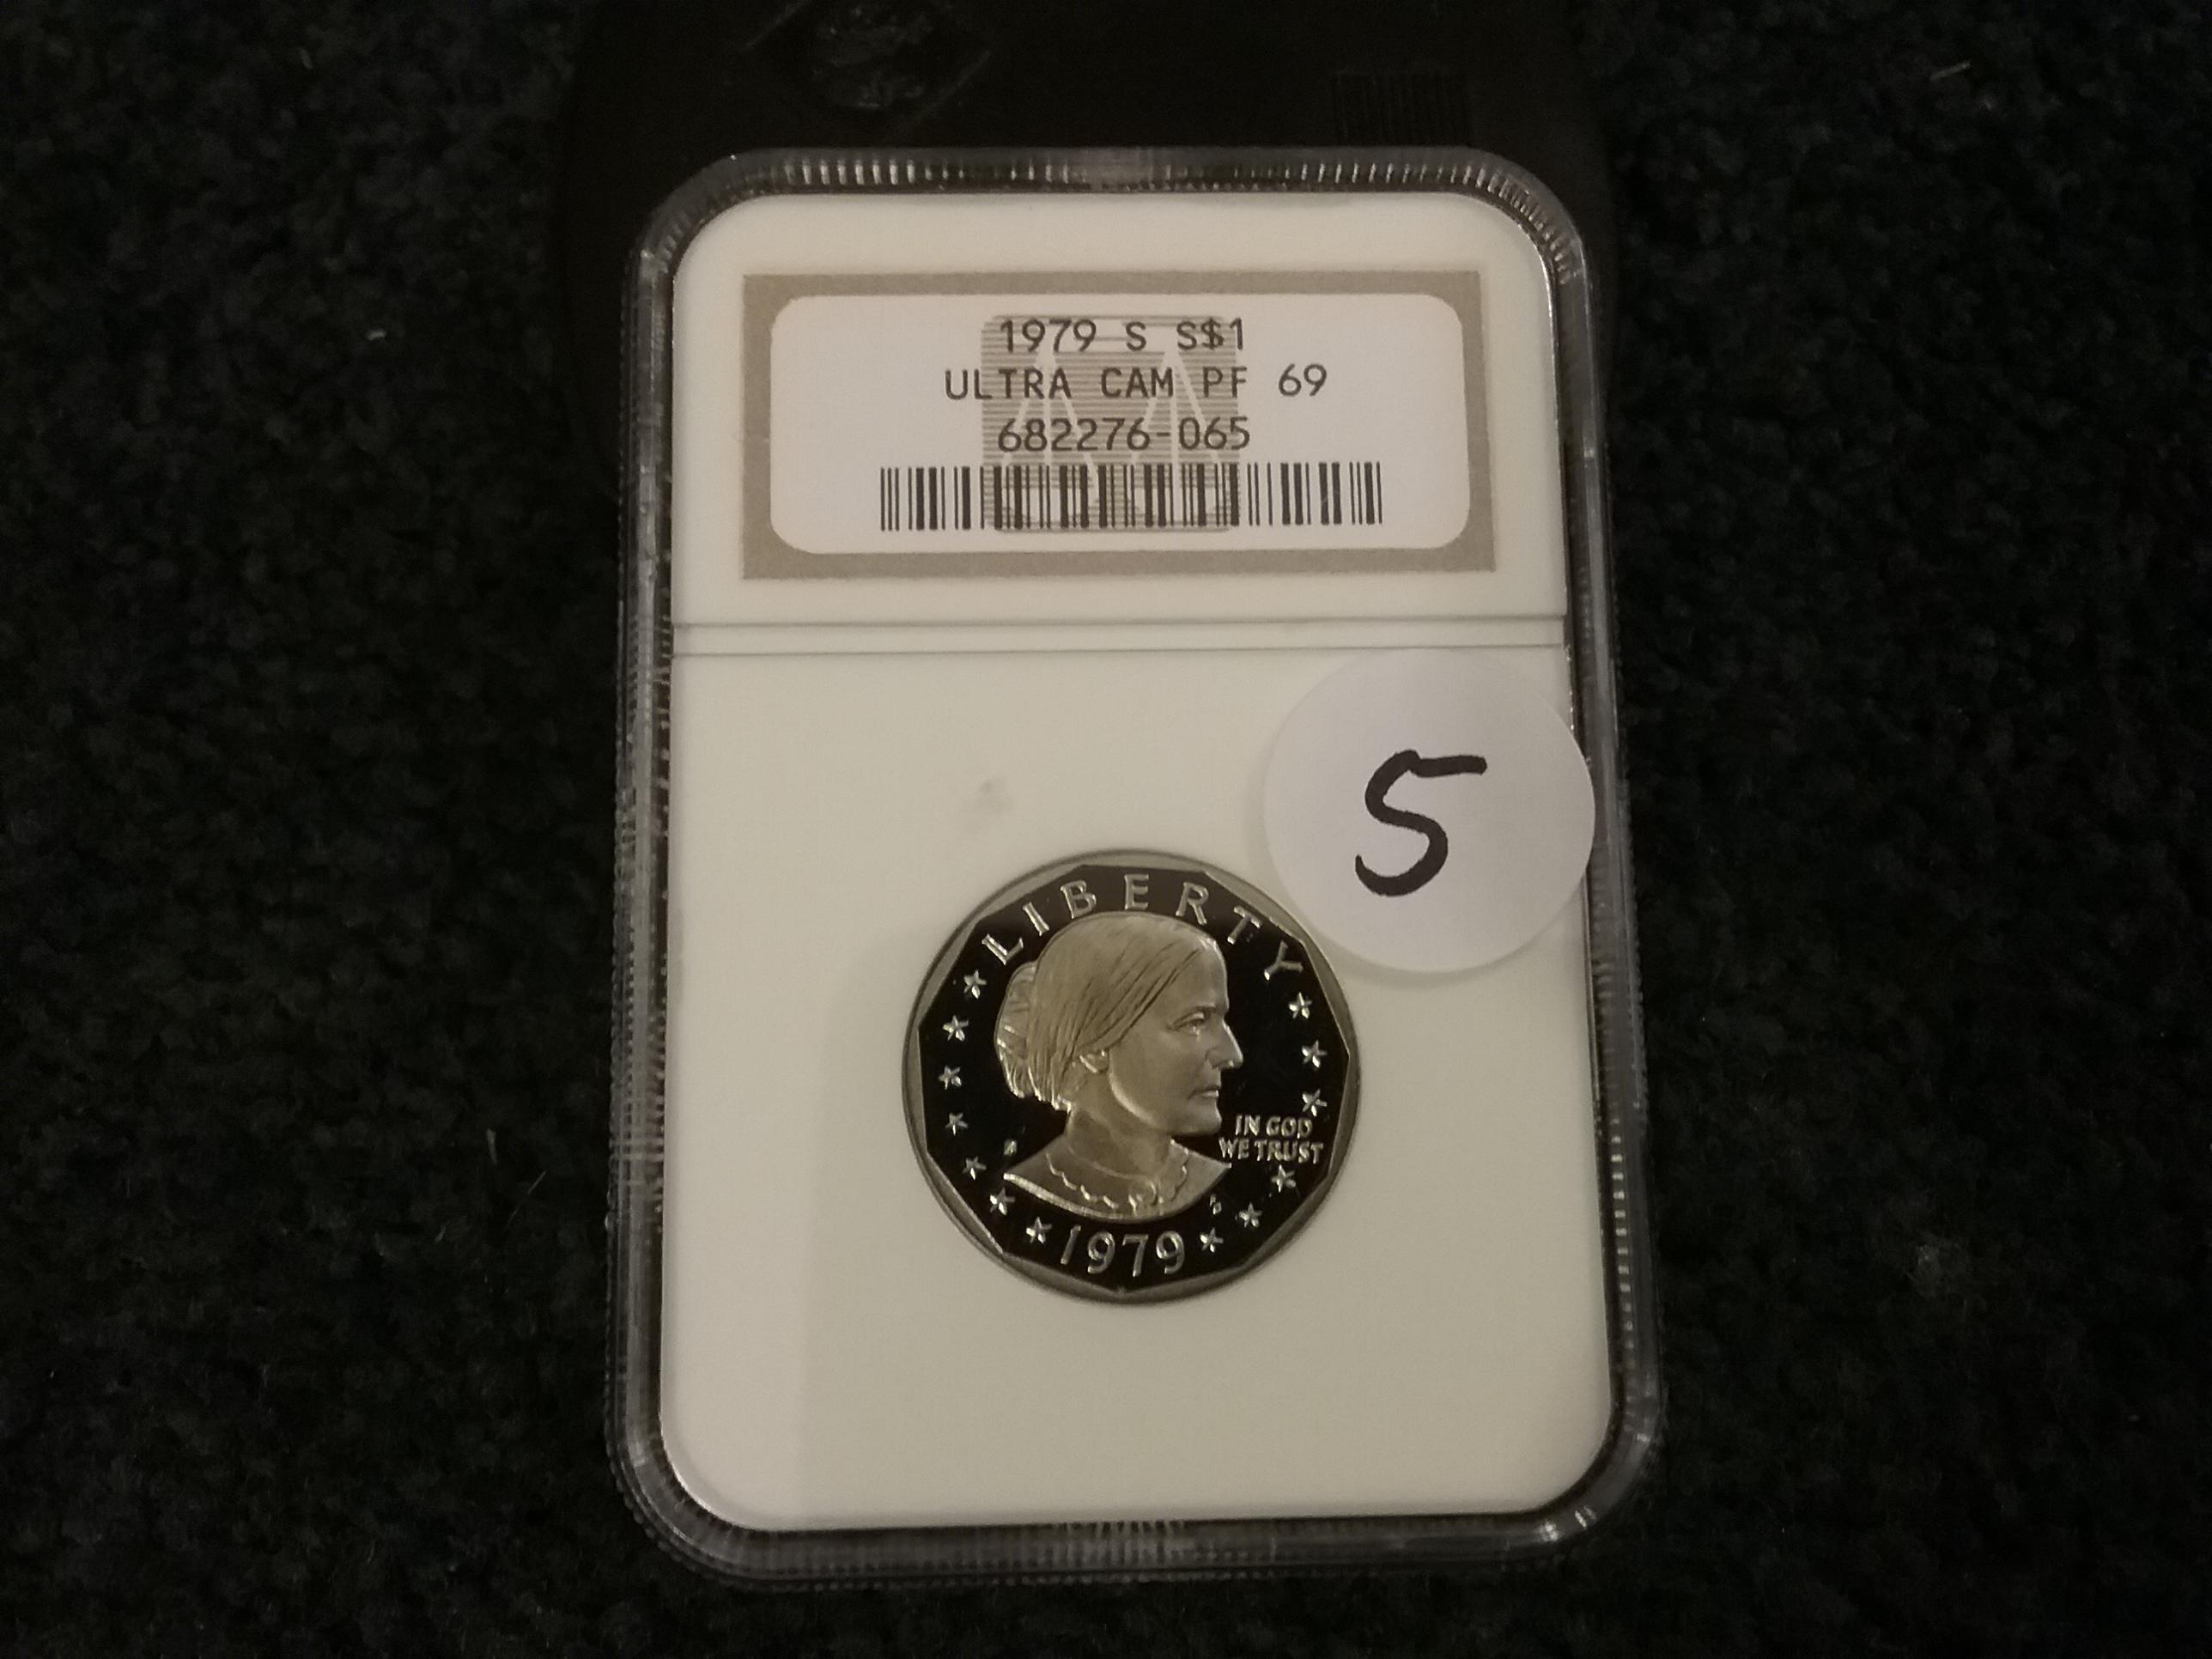 NGC 1979-S $1 Susan B Anthony in Ultra Cameo PF 69